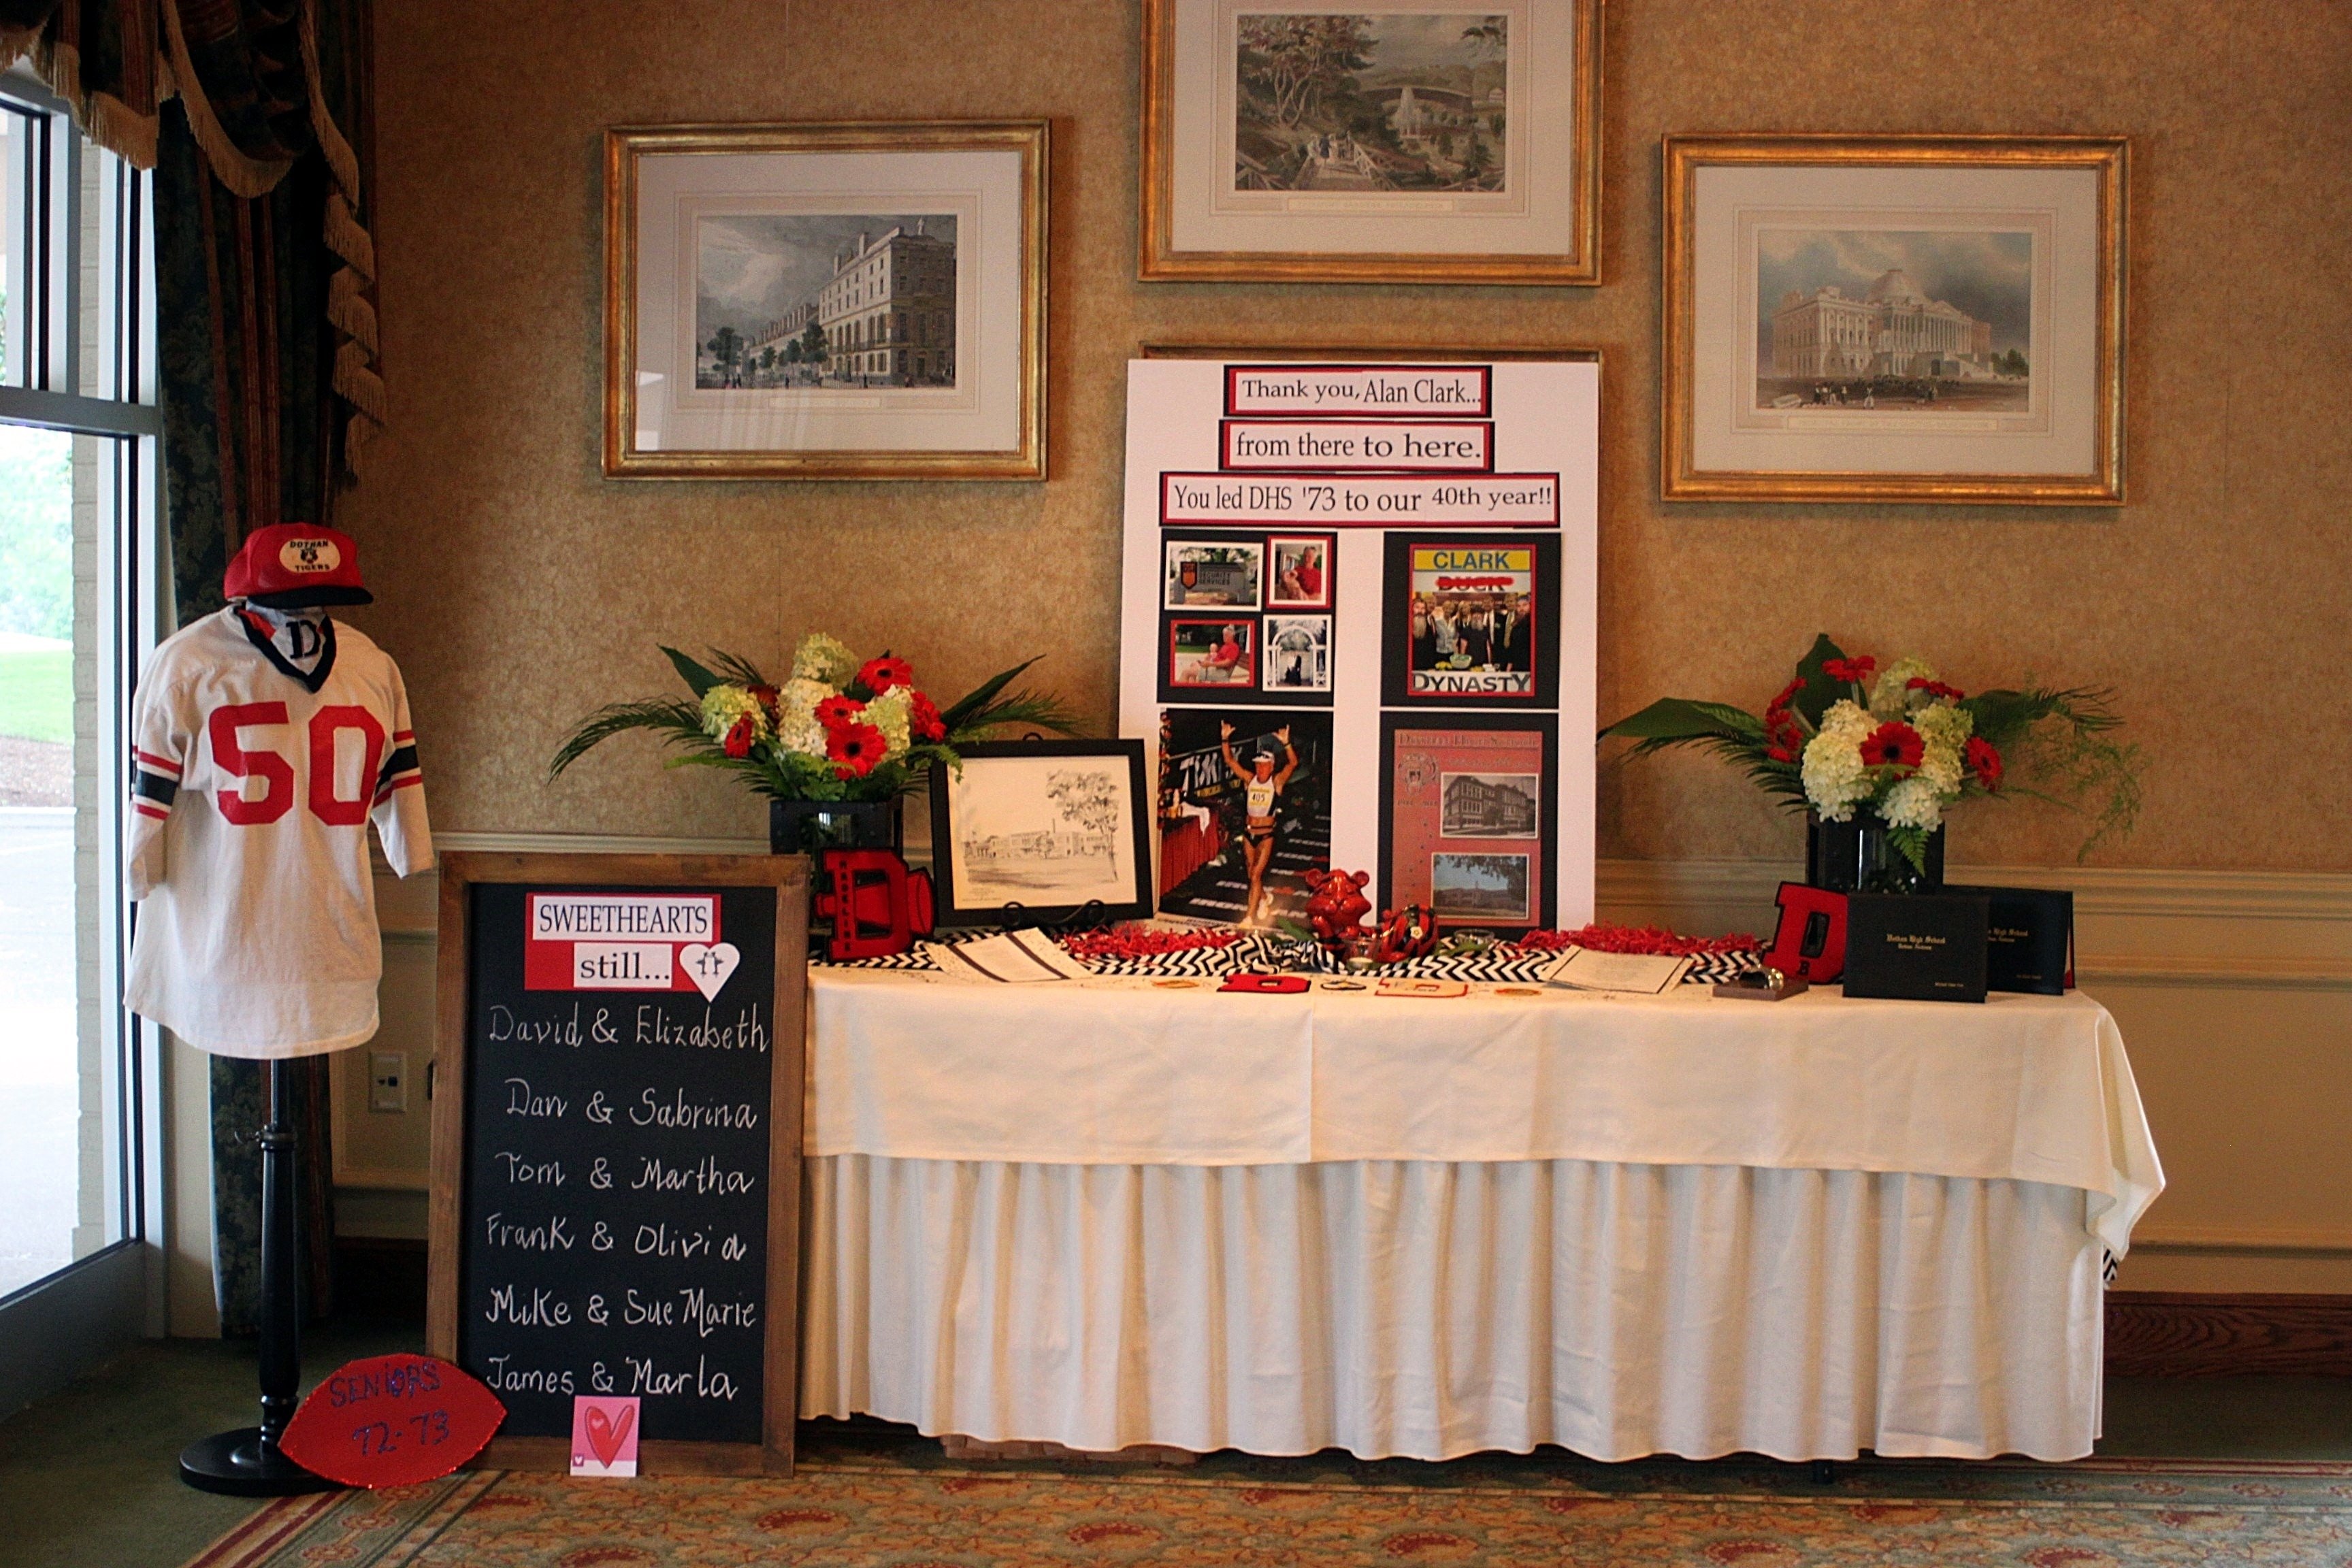 10 Unique 40Th High School Reunion Ideas high school reunion decorating ideas simply simple pic on with high 2022